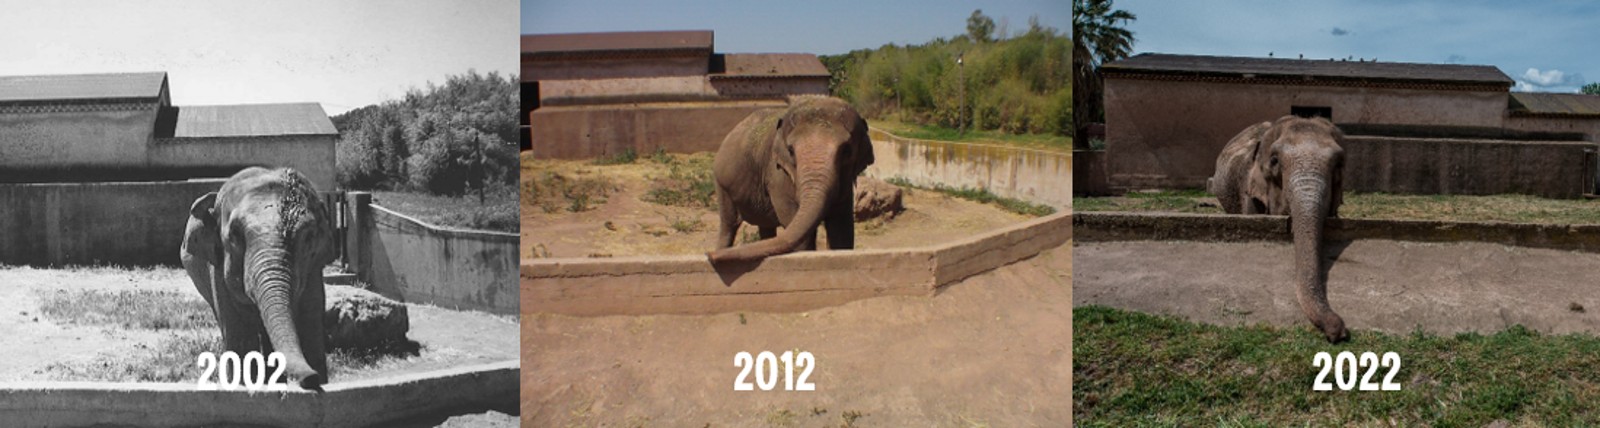 three images side by side showing elephants in small zoo enclosures, each taken 10 years apart.